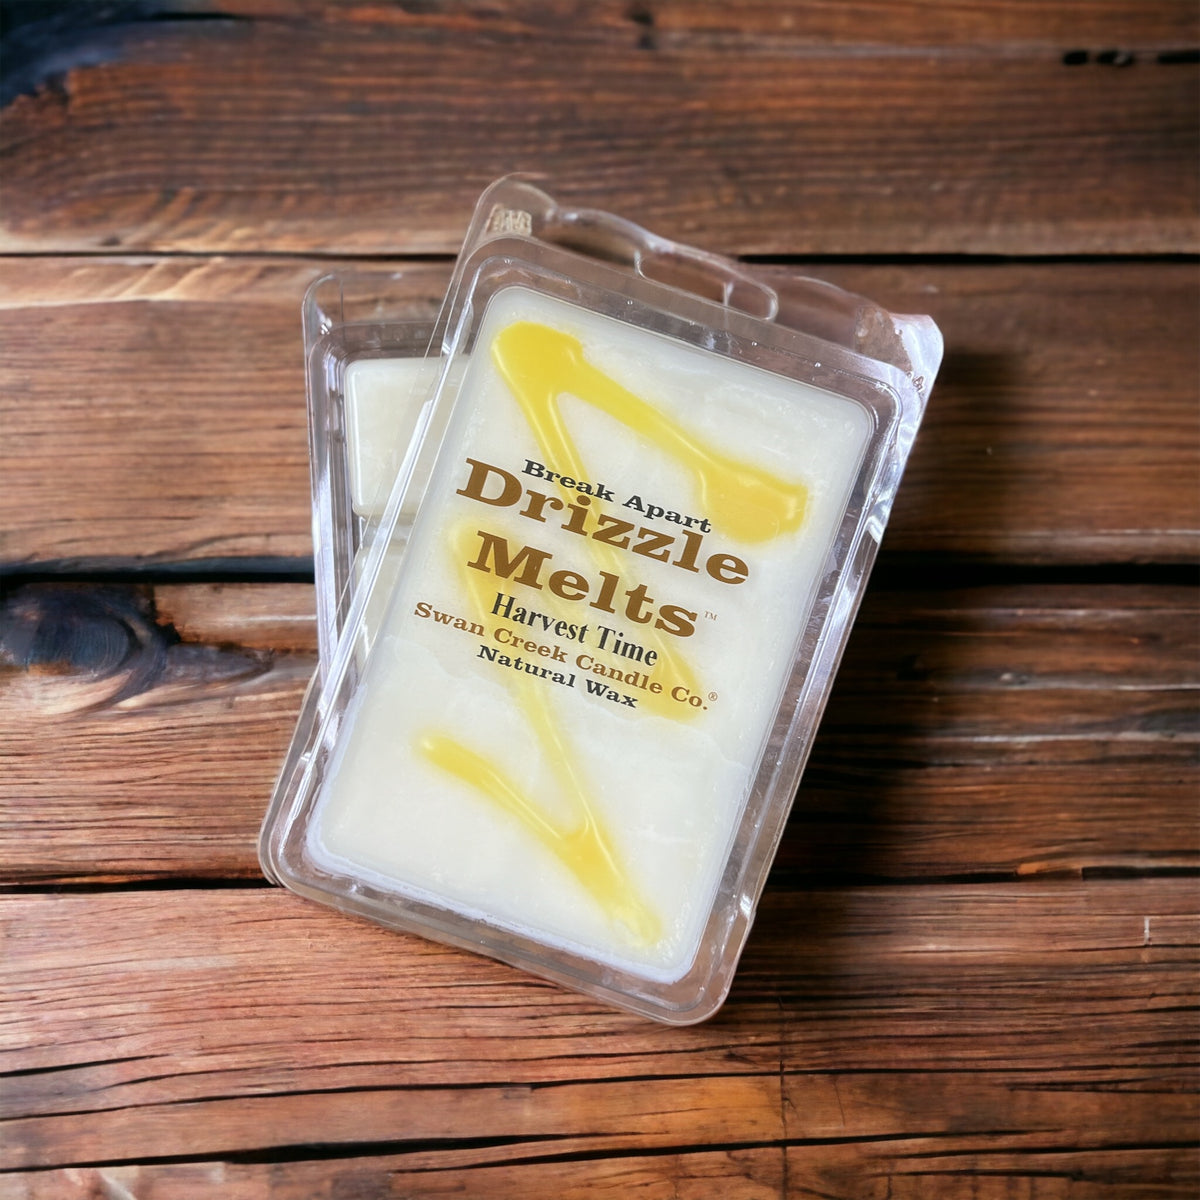 Harvest Time 5.25oz Drizzle Melts by Swan Creek Candle